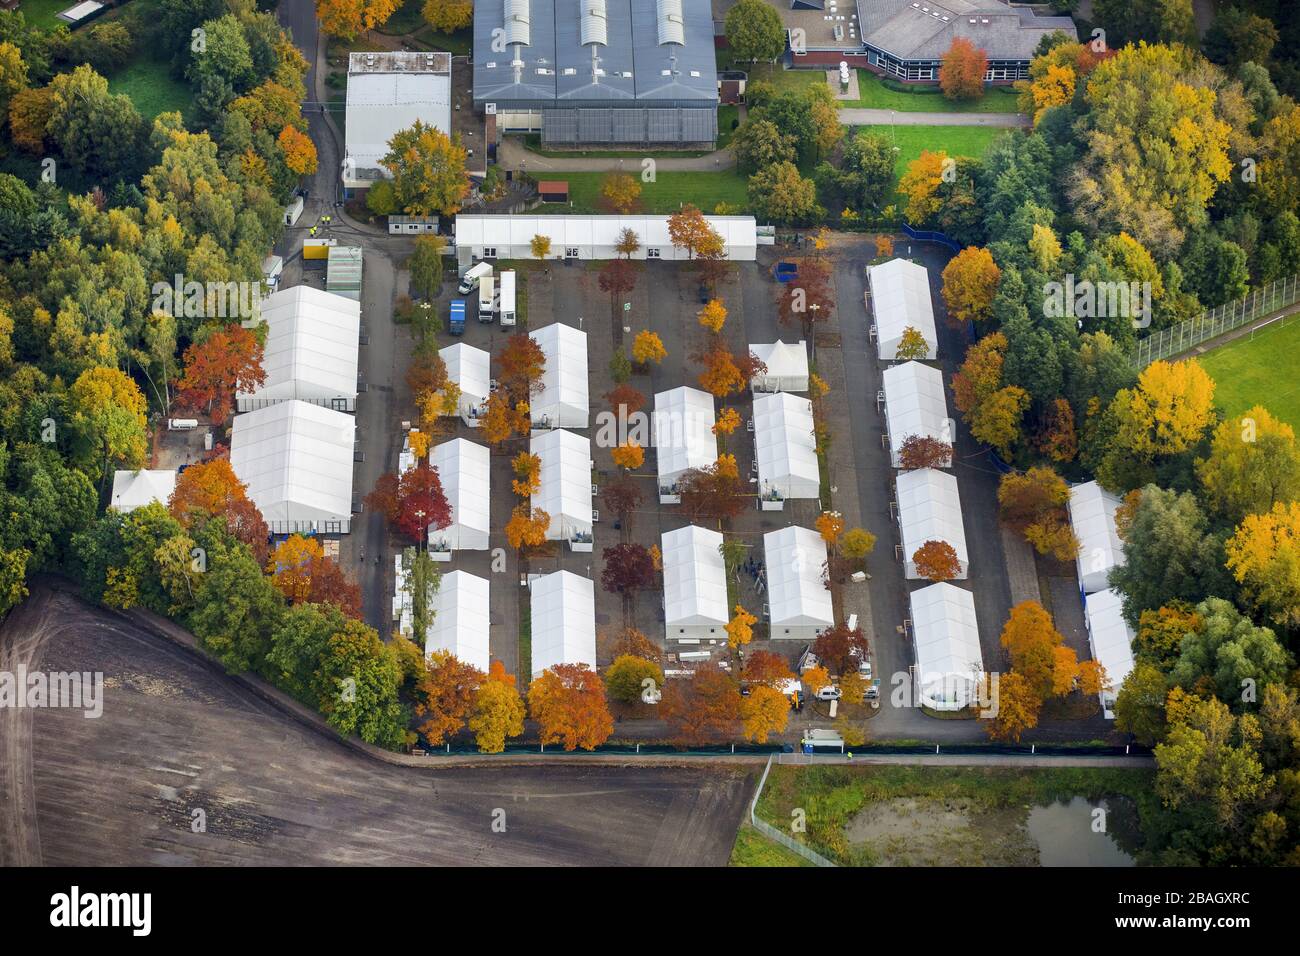 , Refugee buildings, tent city on the grounds of the national police school in Selm, 23.10.2015, aerial view, Germany, North Rhine-Westphalia, Ruhr Area, Selm Stock Photo